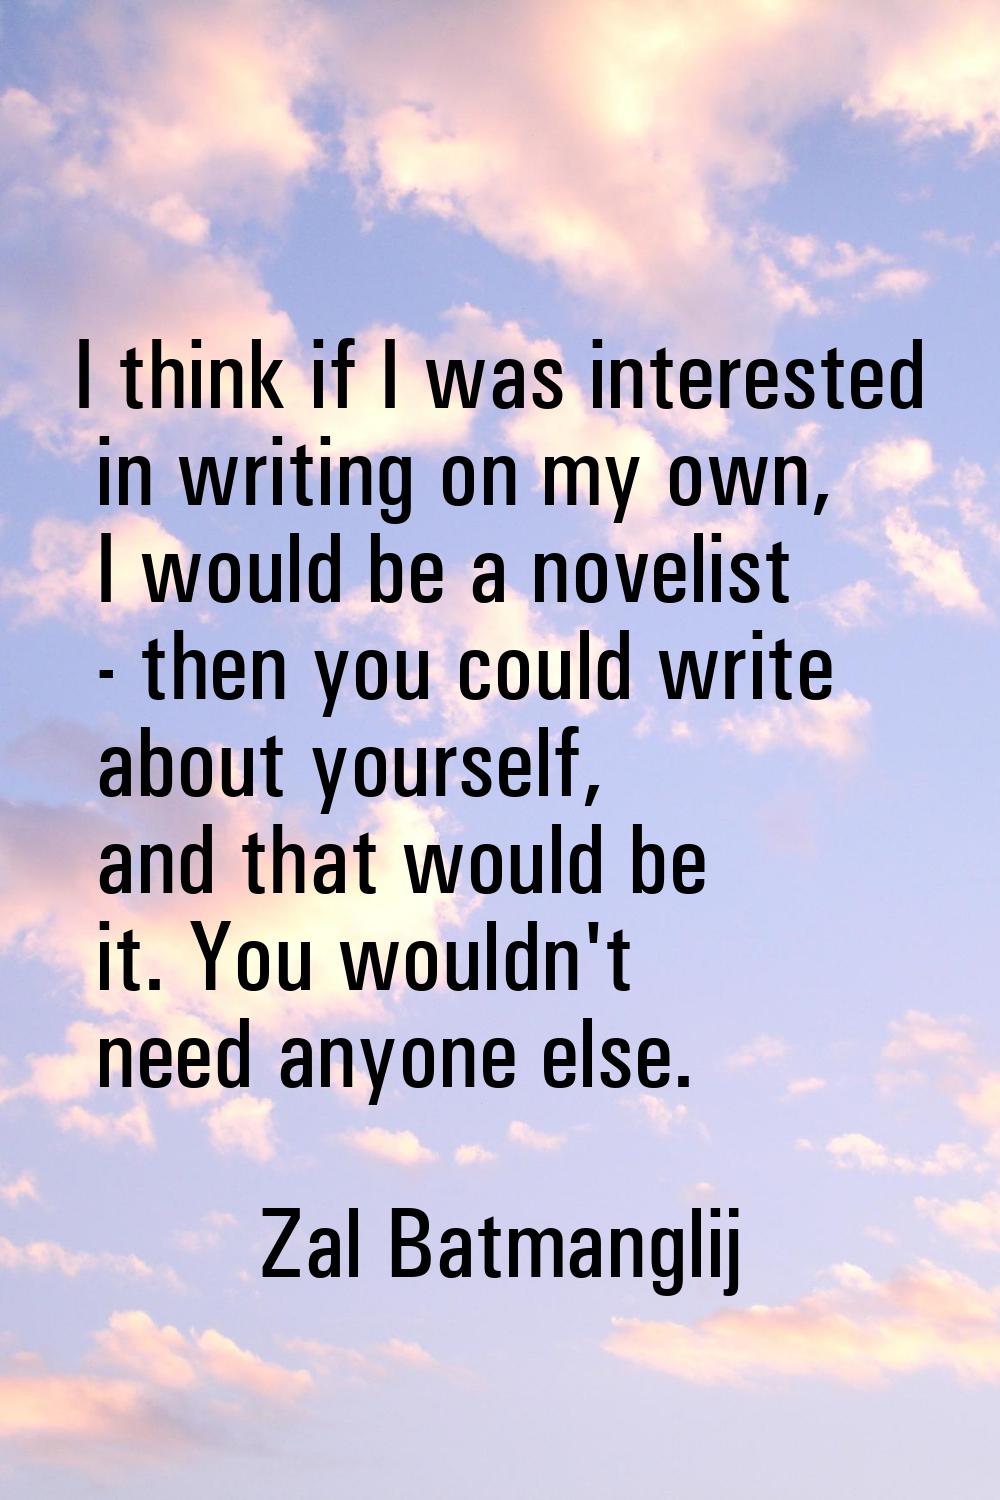 I think if I was interested in writing on my own, I would be a novelist - then you could write abou